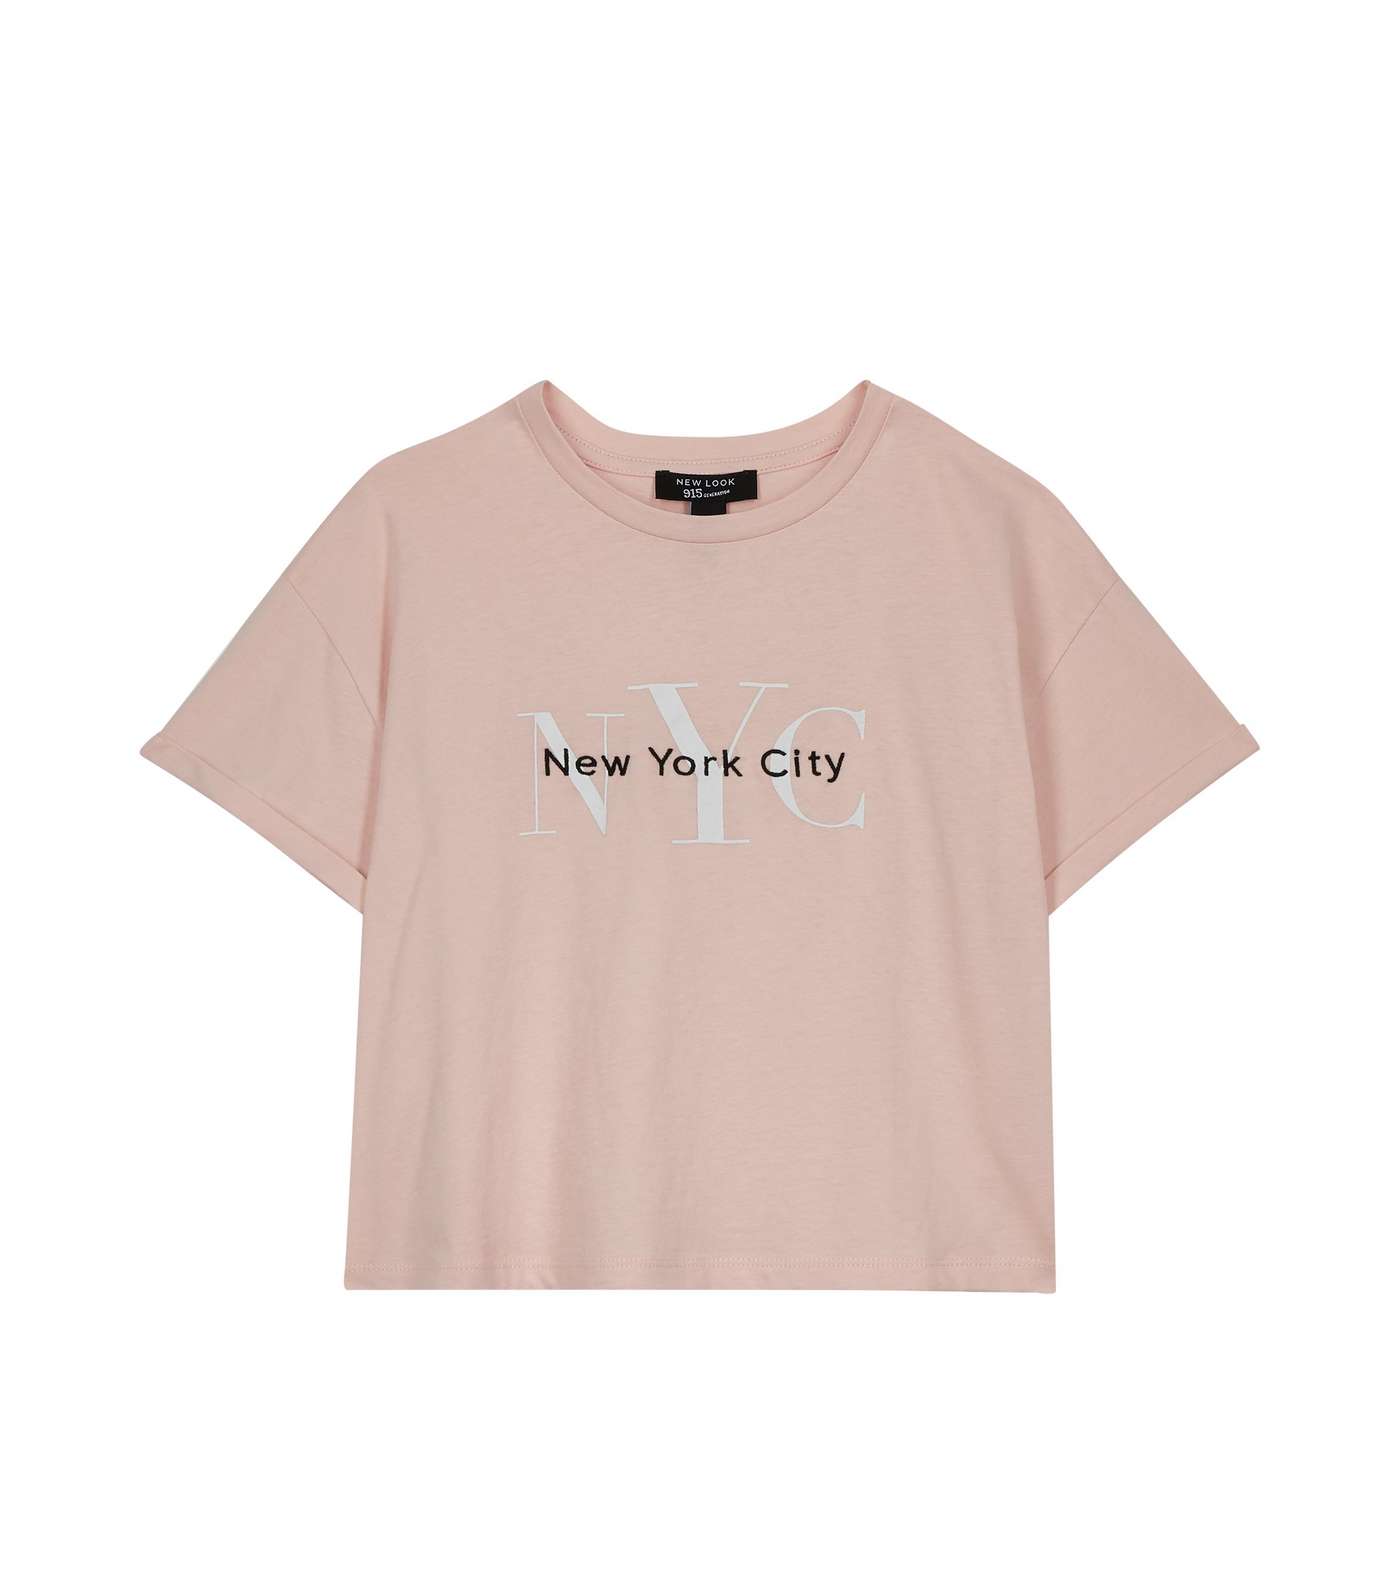 Girls Pale Pink NYC Embroidered Slogan T-Shirt